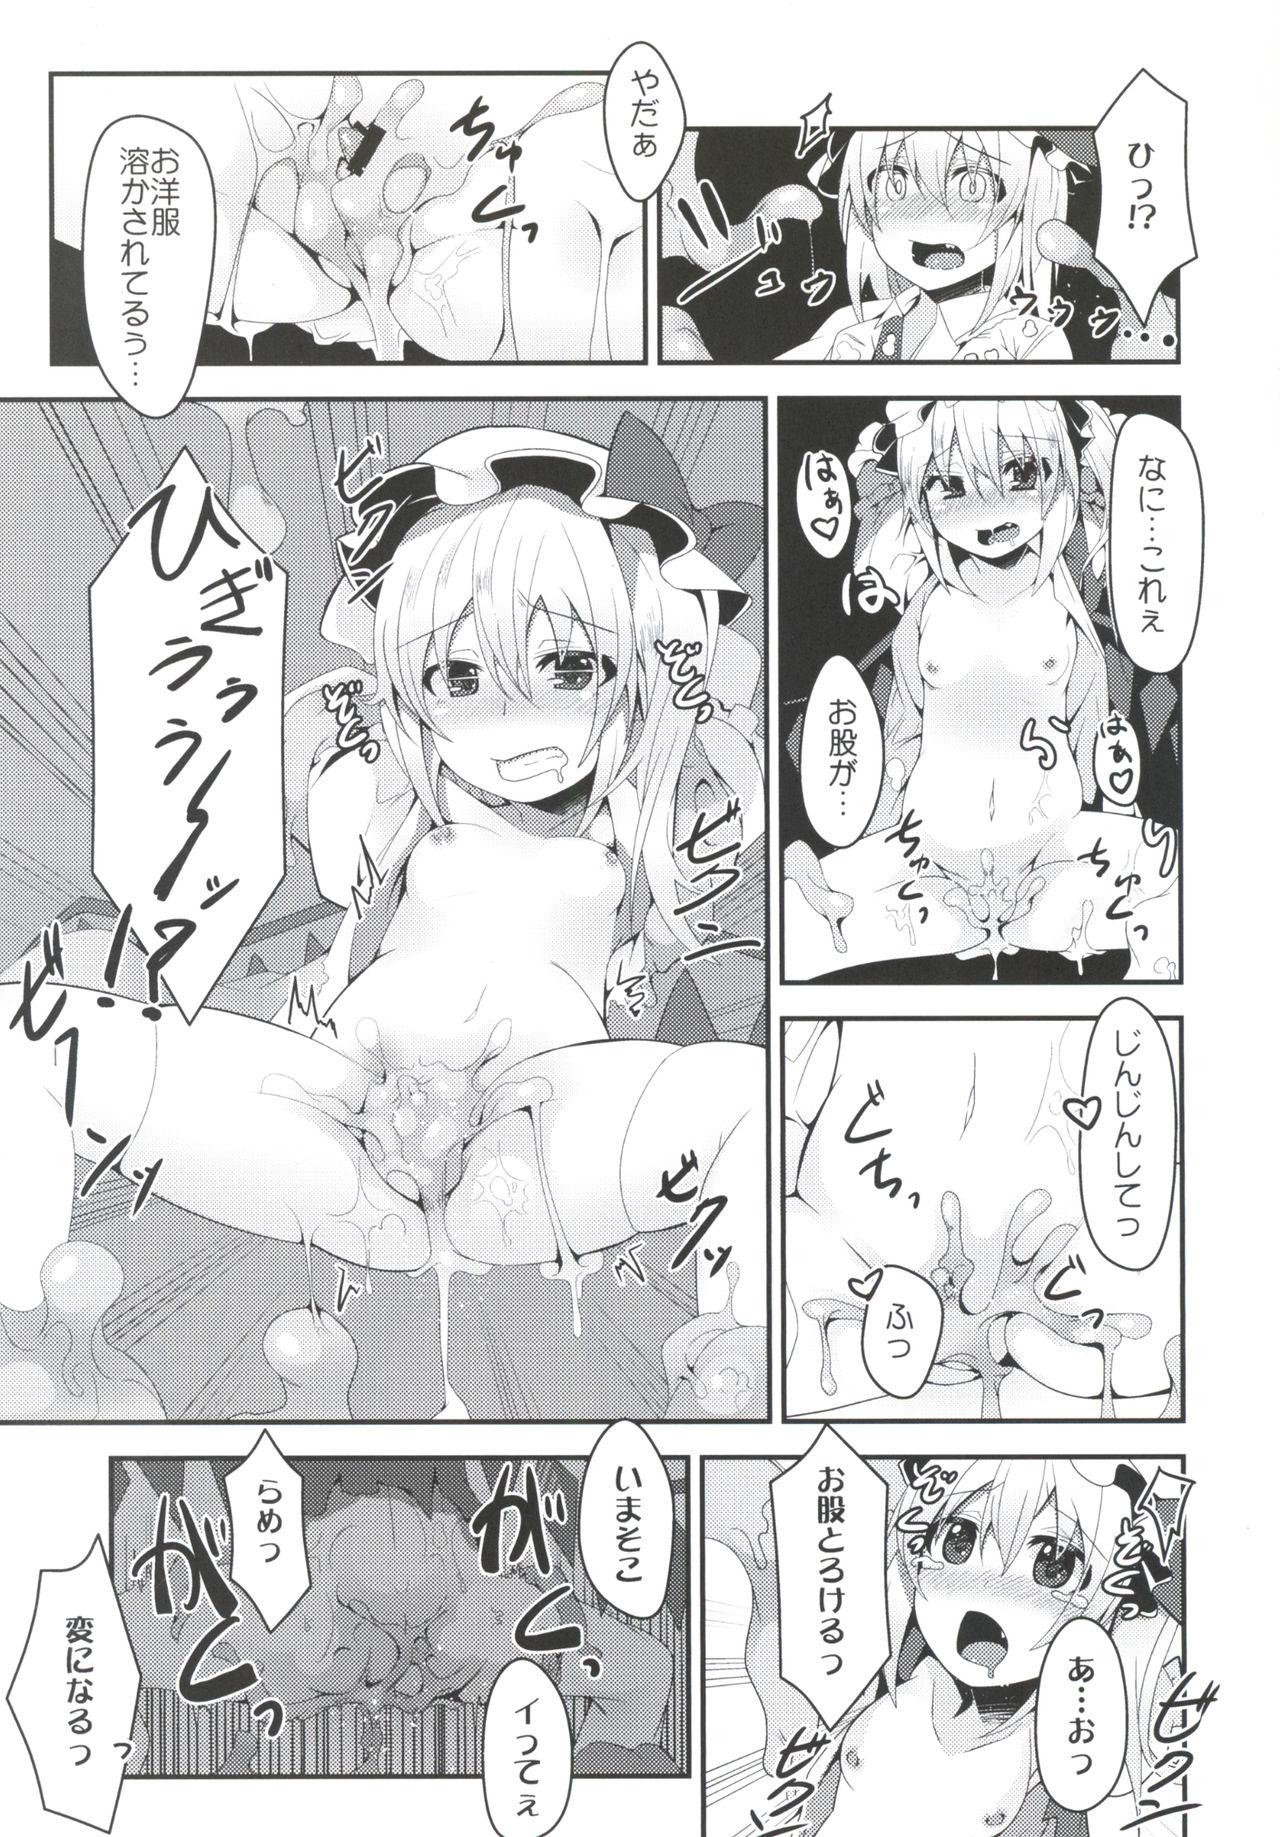 Outdoor Flan-chan no Ero Trap Dungeon - Touhou project Farting - Page 6